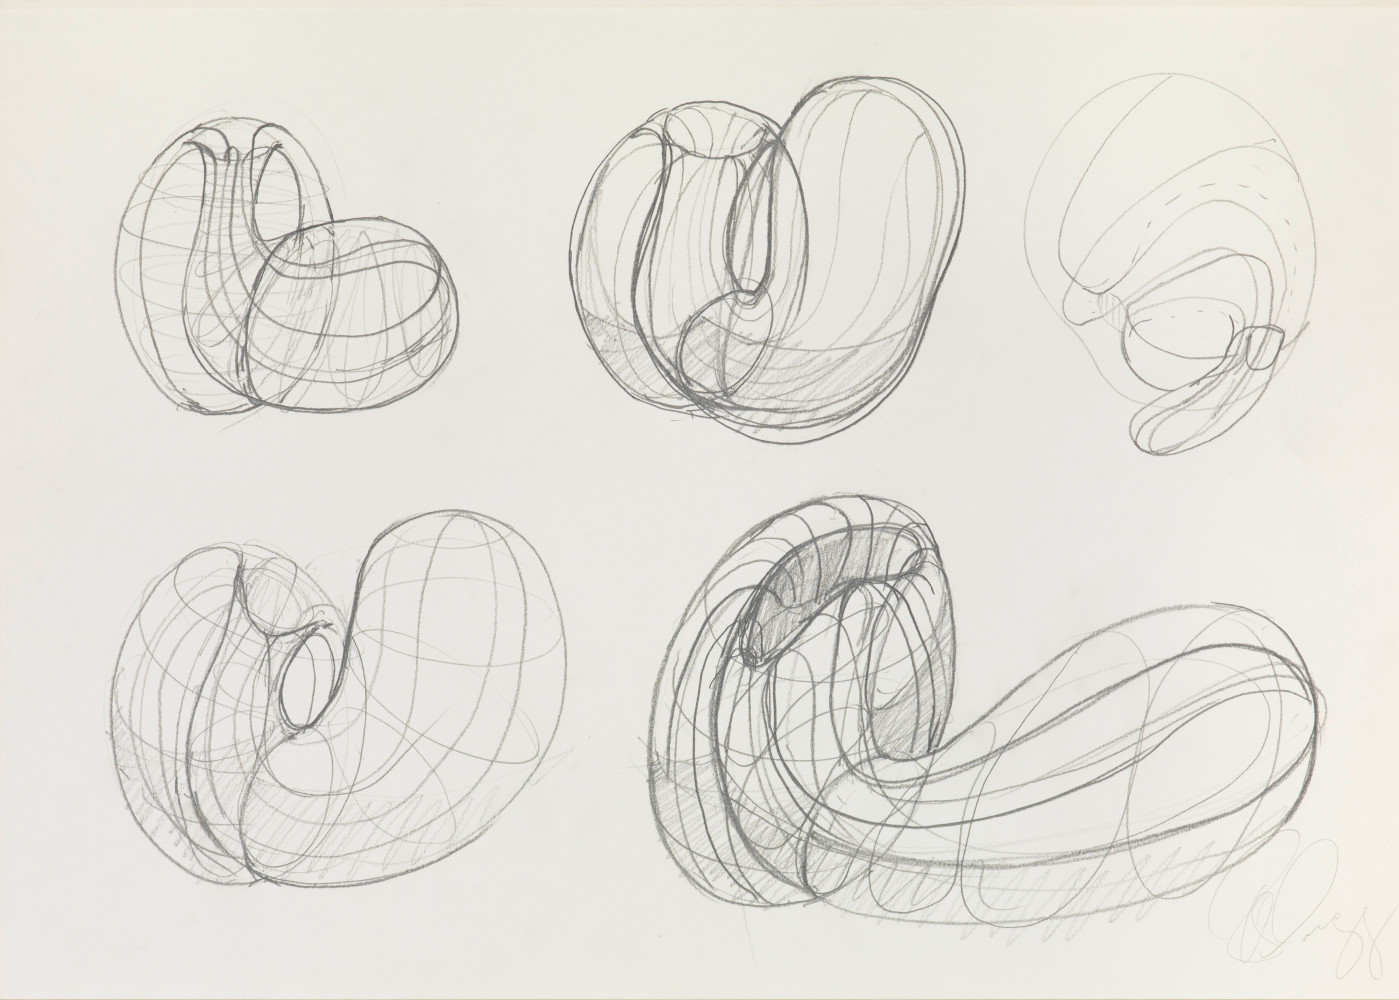 Tony Cragg, ‘Untitled (#1323)’, 1995, Pencil on paper